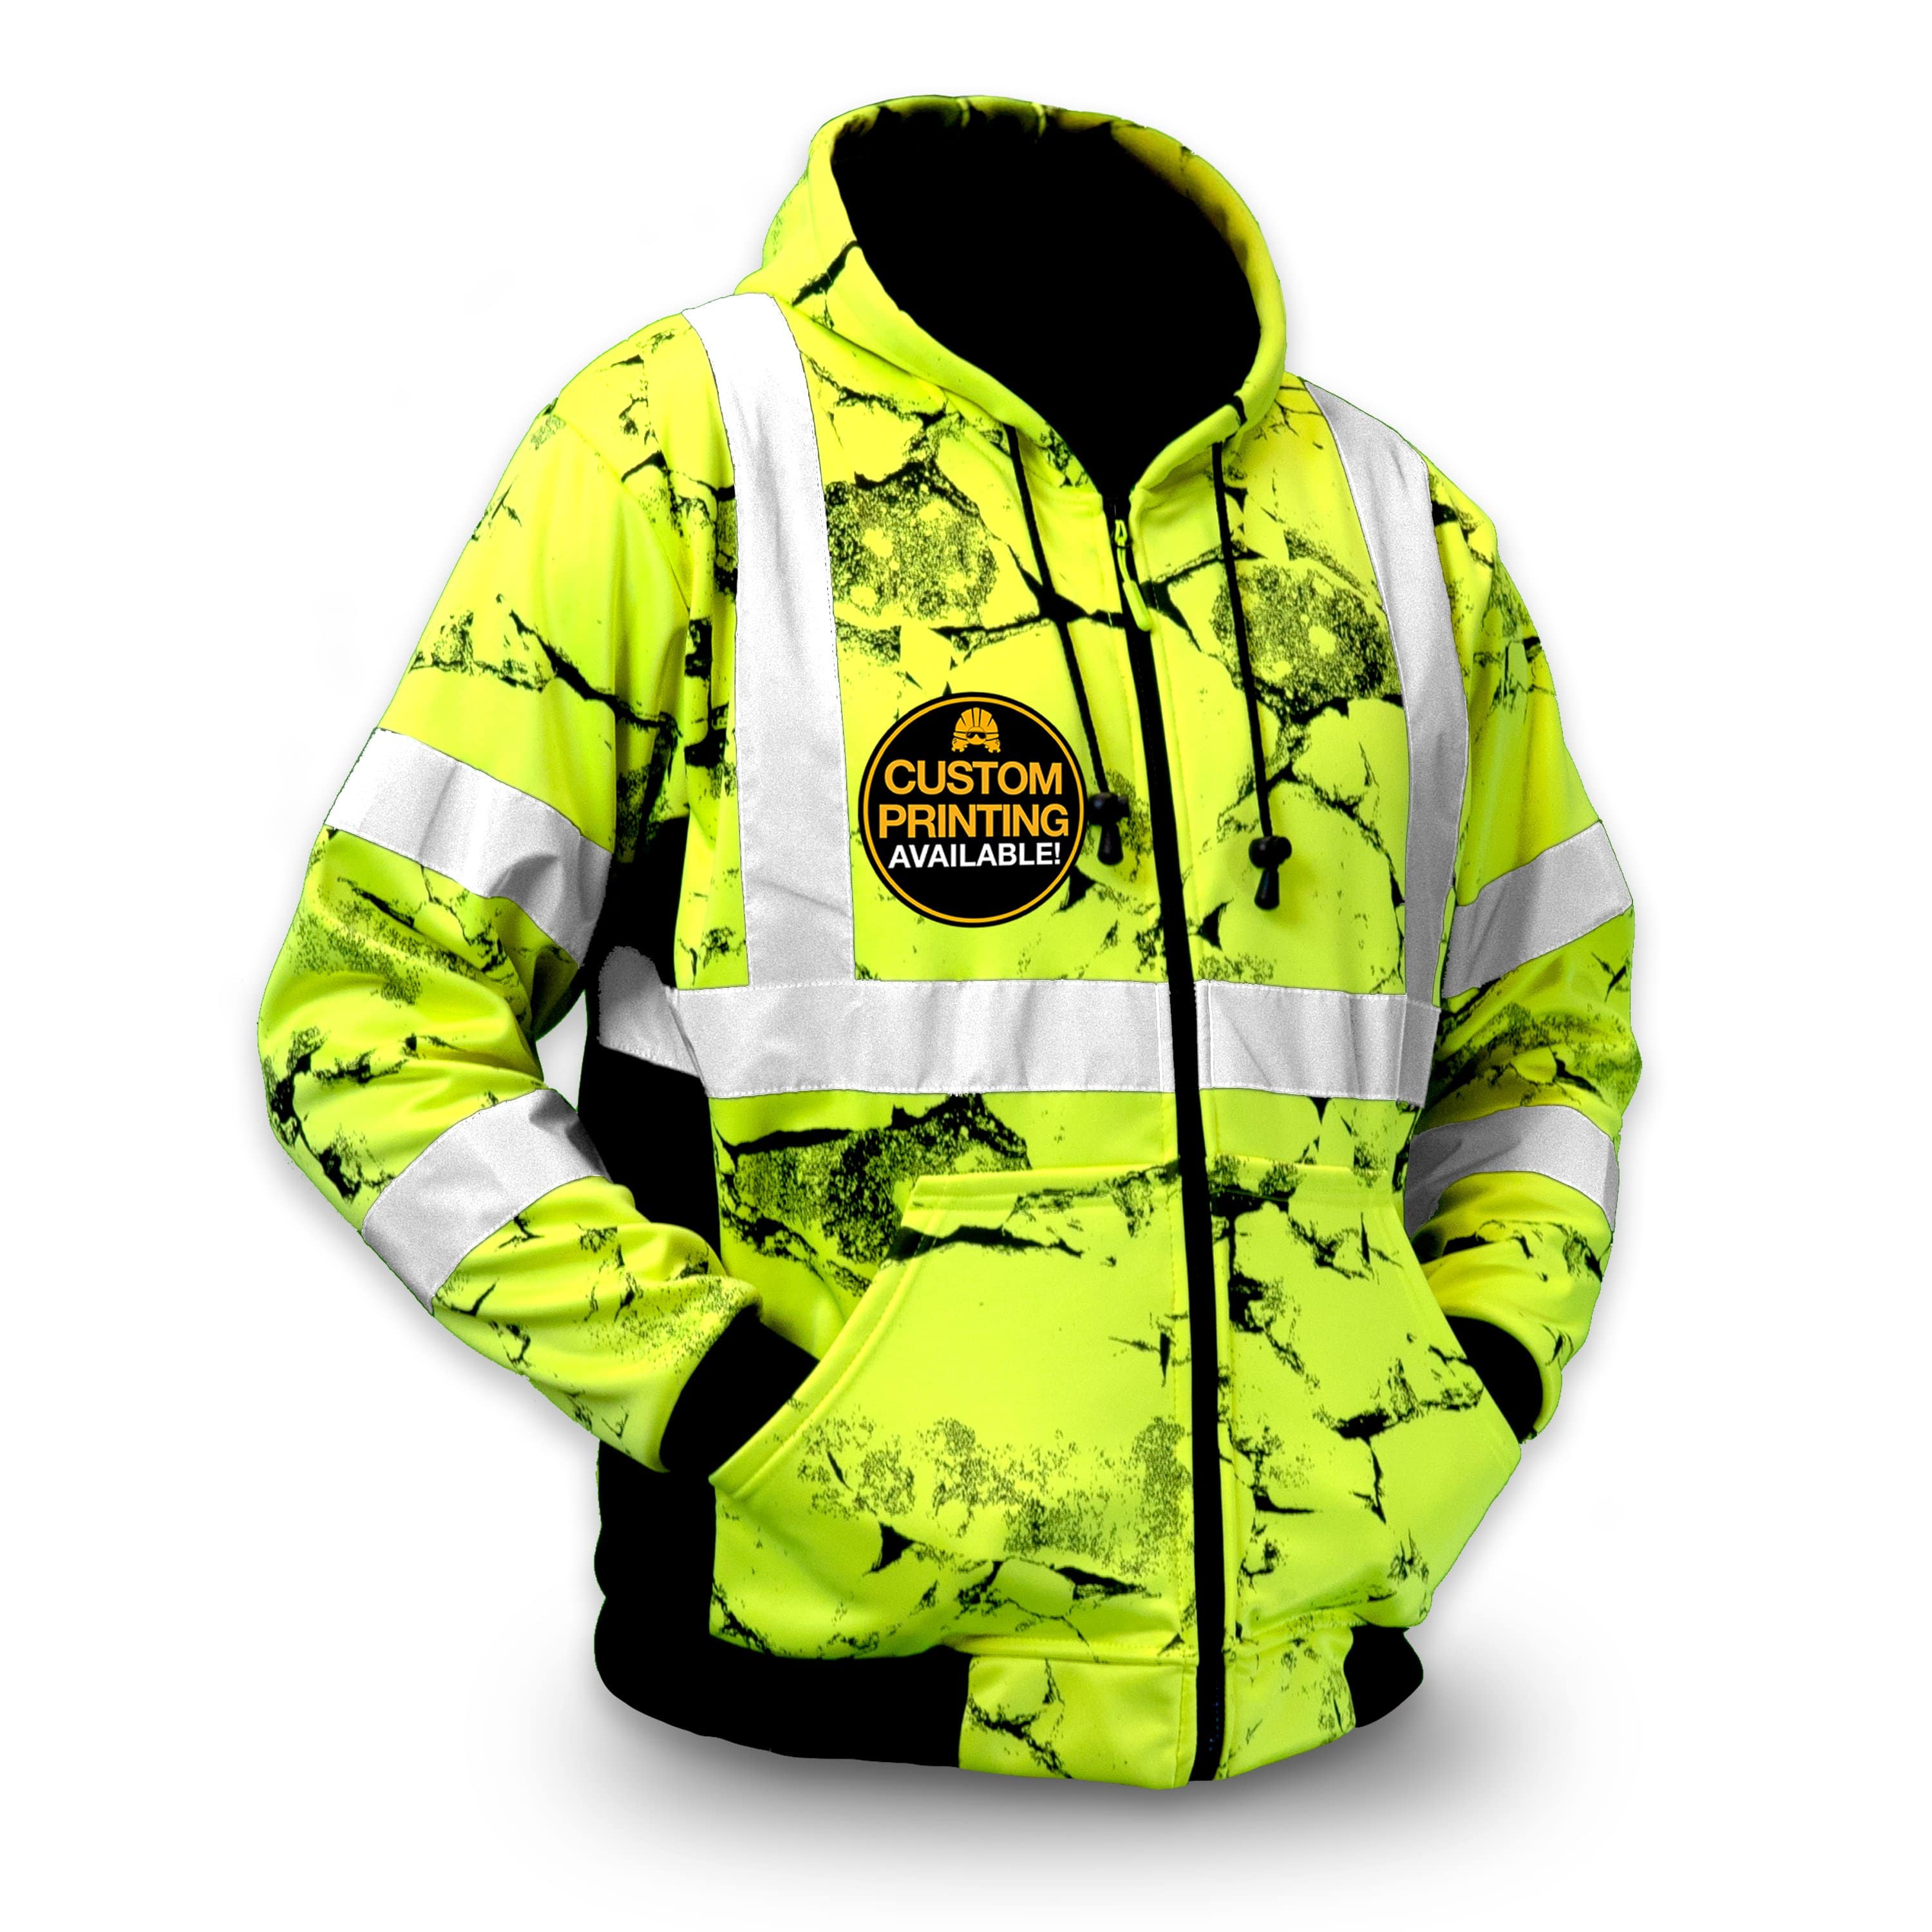 Mesh safety jacket - yellow - Komatsu Merchandise shop | Official apparel,  miniatures and accessories